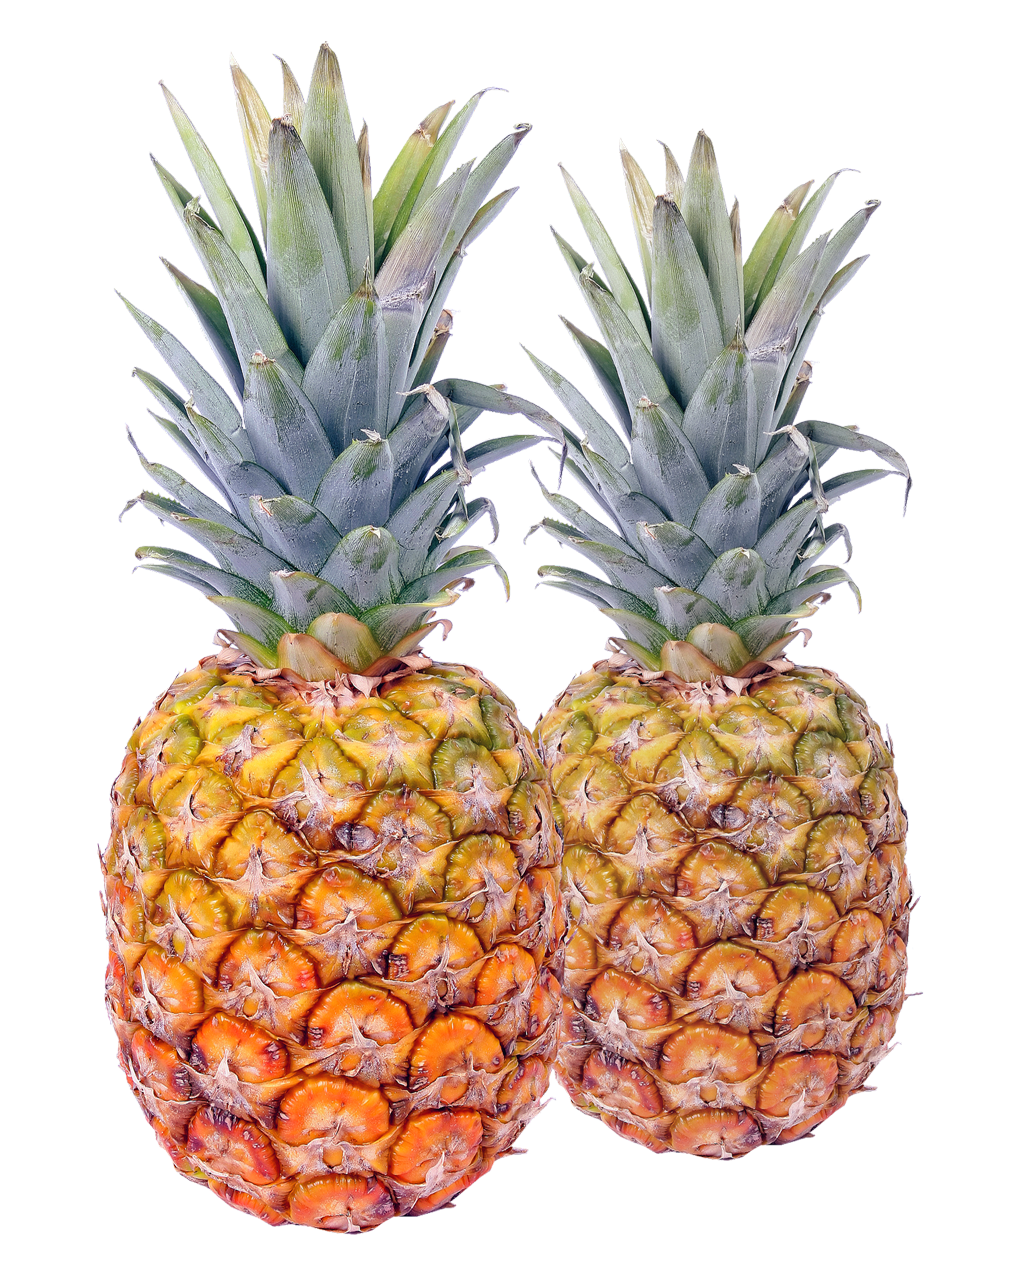 Pineapple Png Transparent Image - Pineapple, Transparent background PNG HD thumbnail